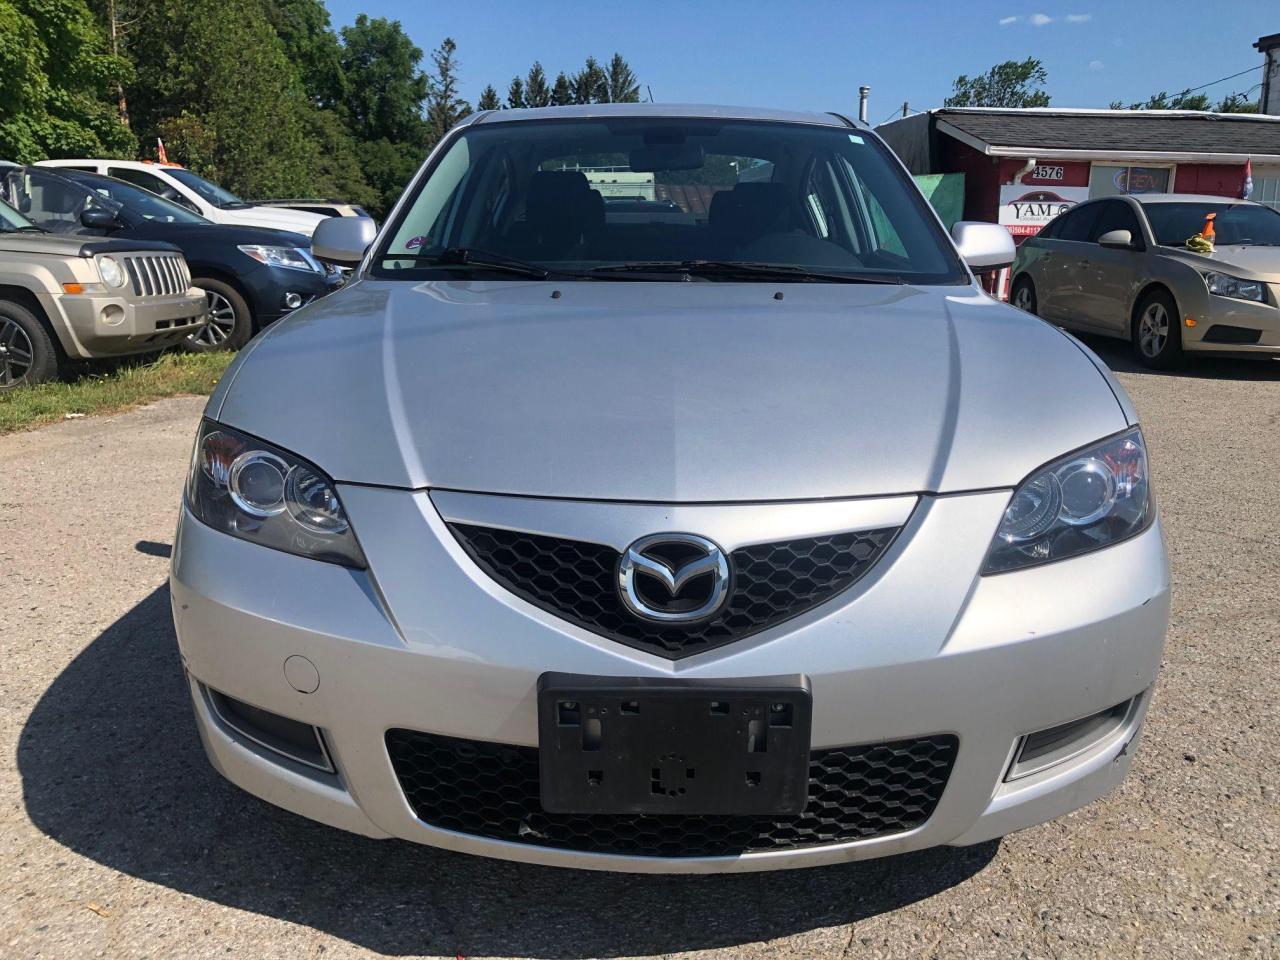 2009 Mazda MAZDA3 GX-Auto*Low KMS 111*Clean Runs & Smooth*Certified* - Photo #2